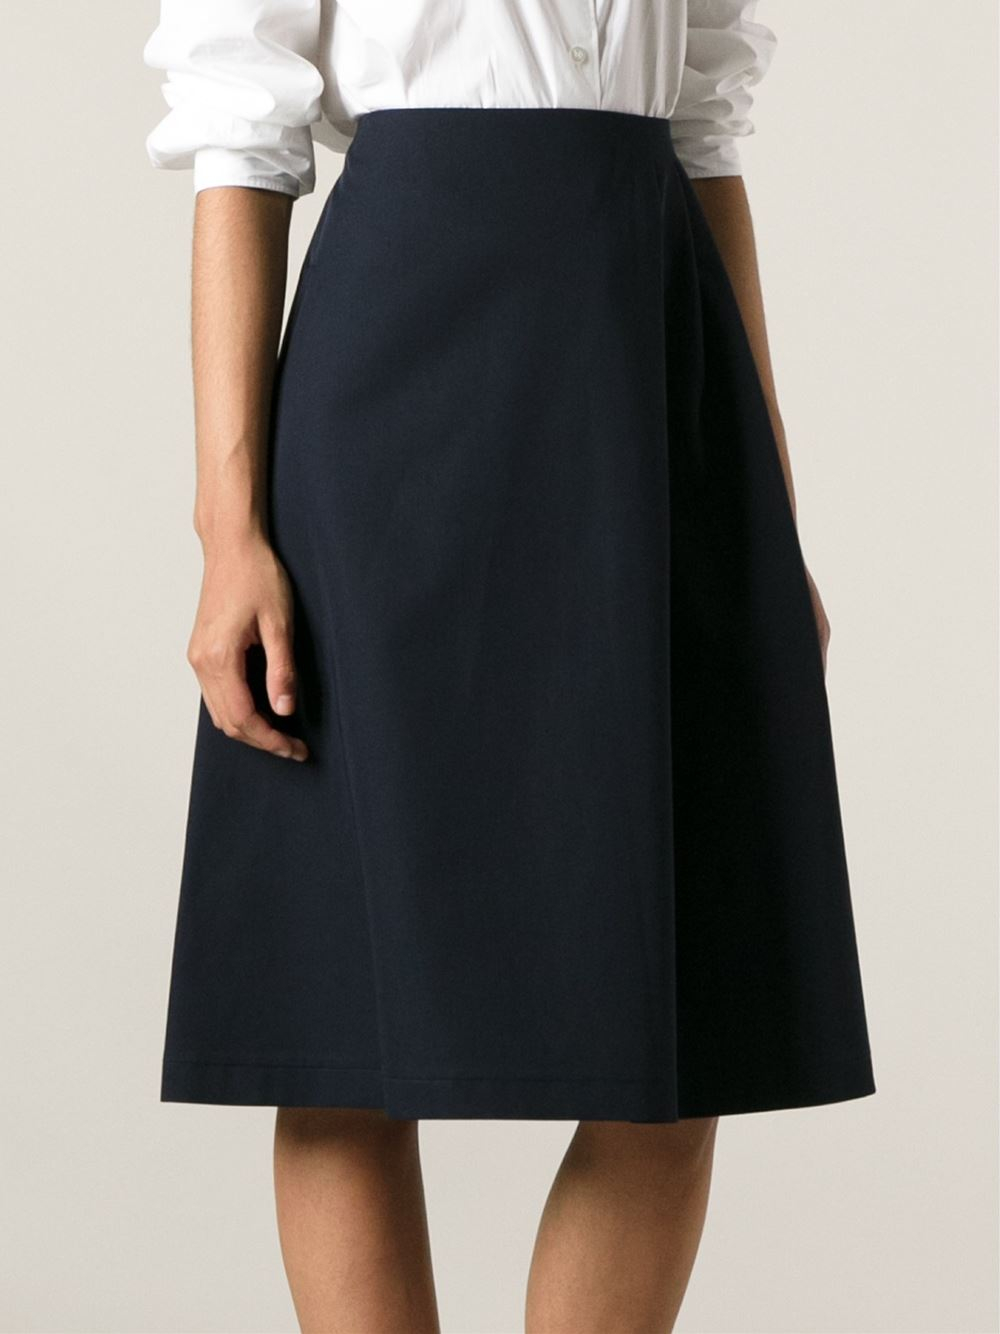 Lyst - Sofie D'Hoore Twill Skirt in Blue